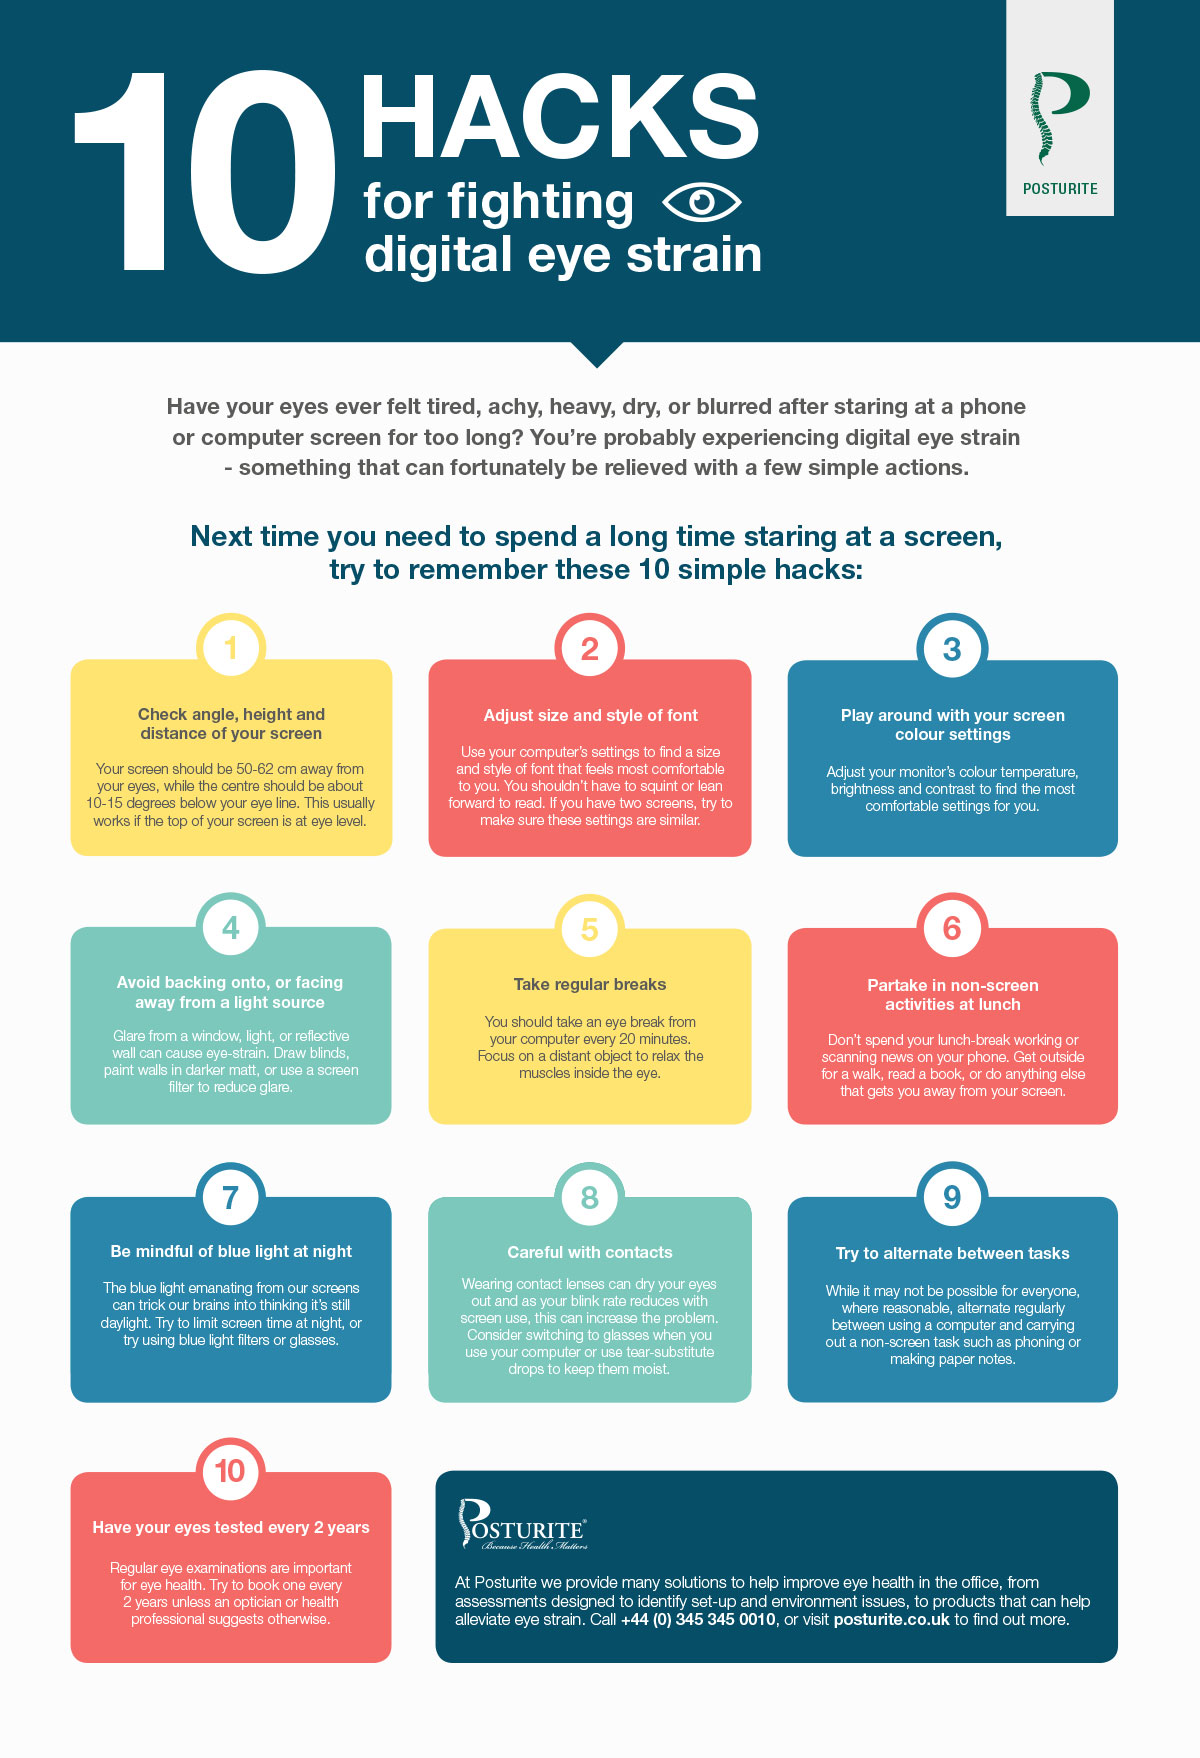 10 hacks for fighting digital eye strain infographic, linking through to a PDF which you can download